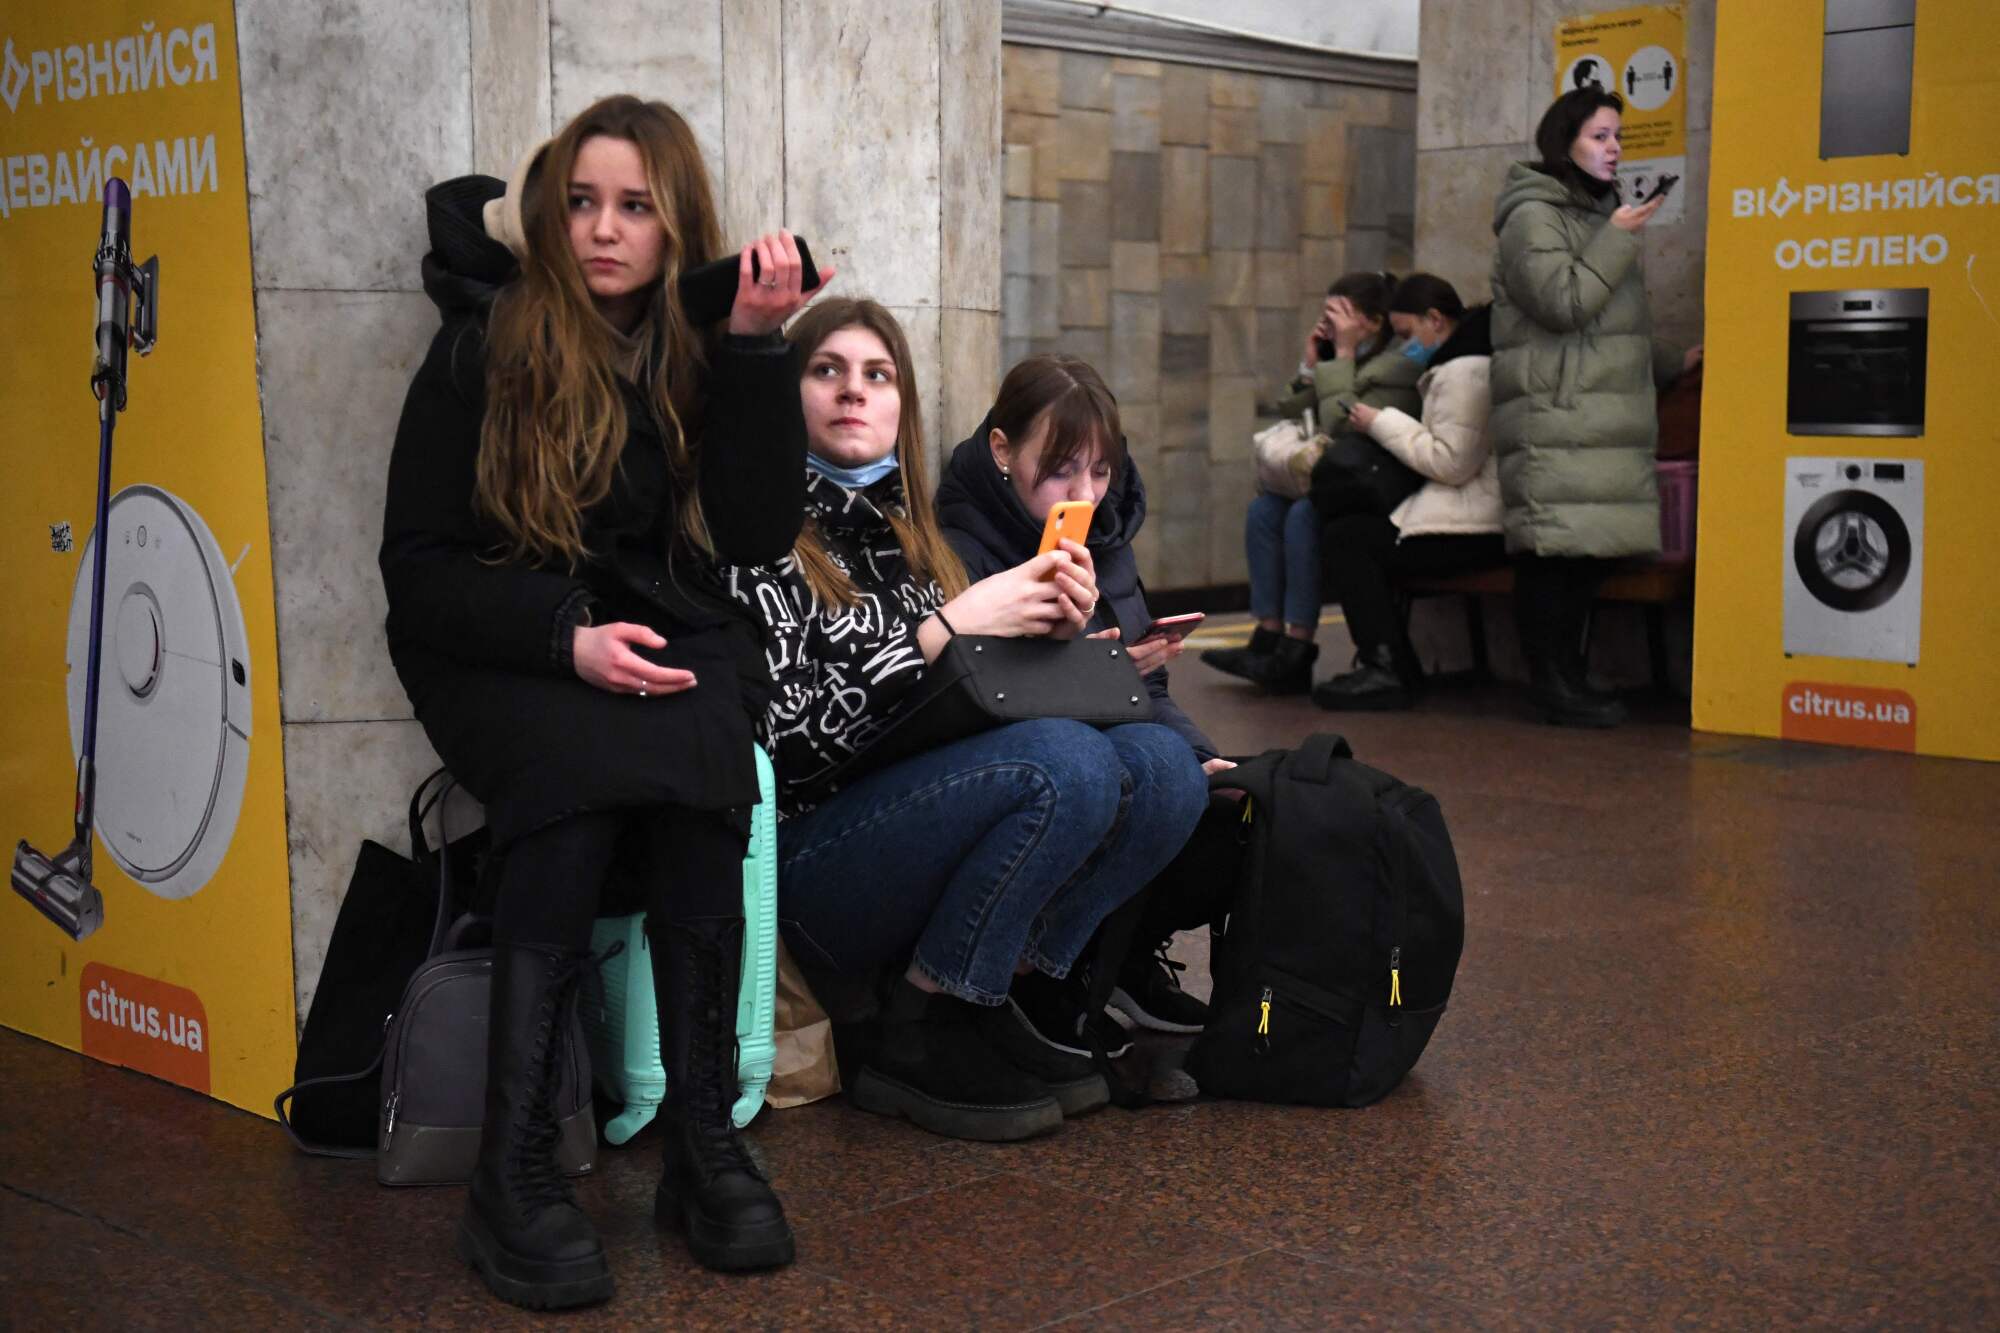 Girls hold their mobile phones as they take refuge in a Kyiv metro station